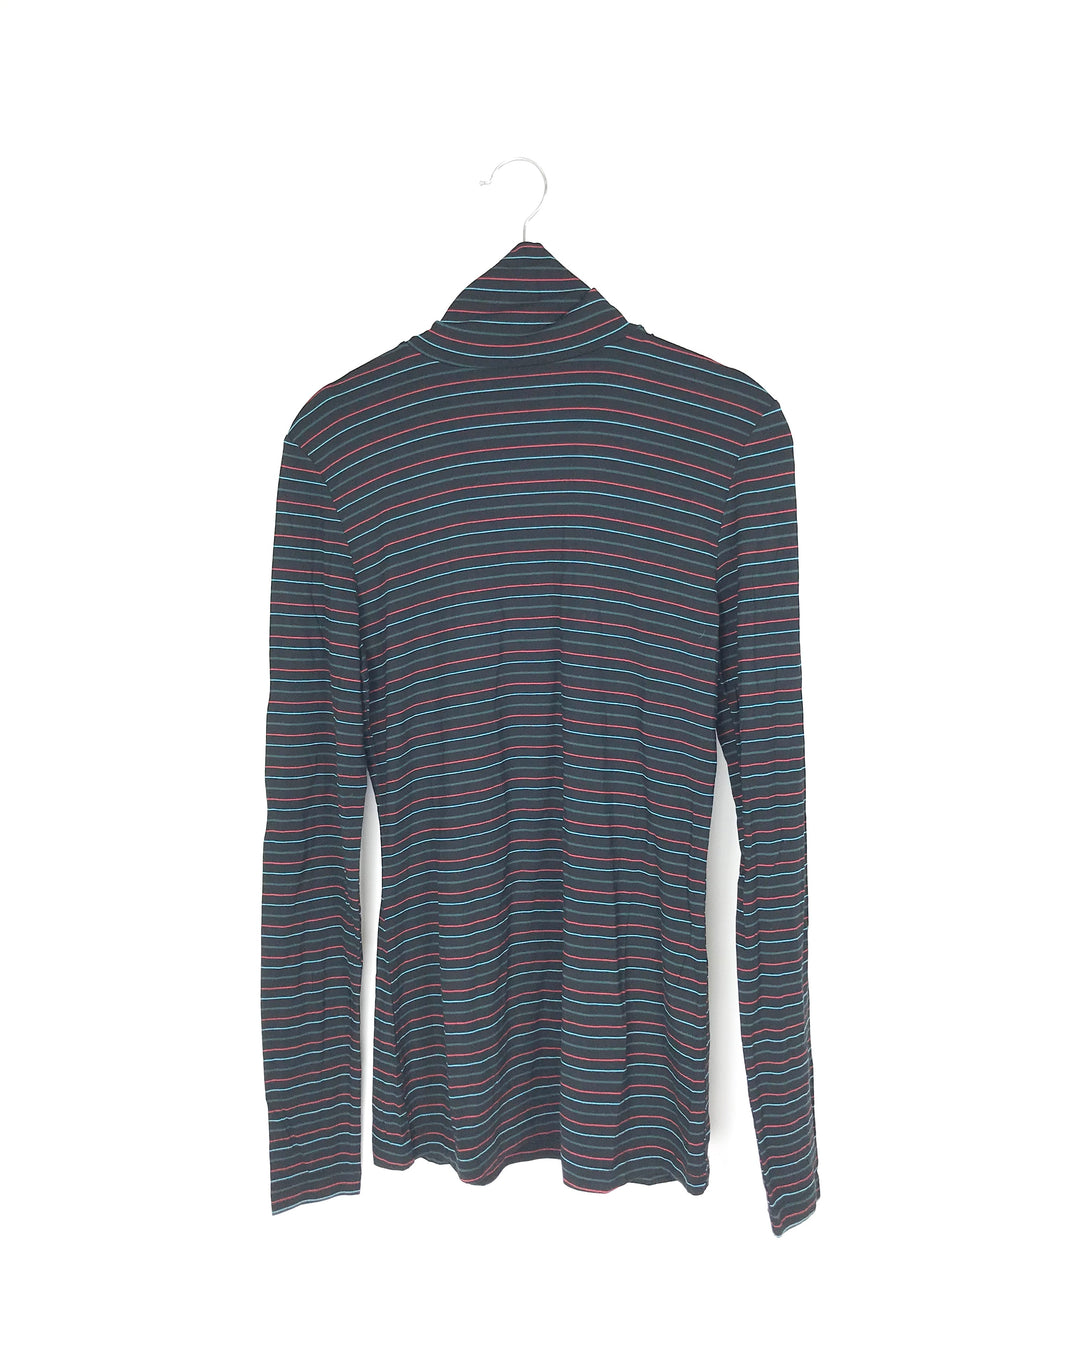 Black and Colorful Striped Turtle Neck - Small